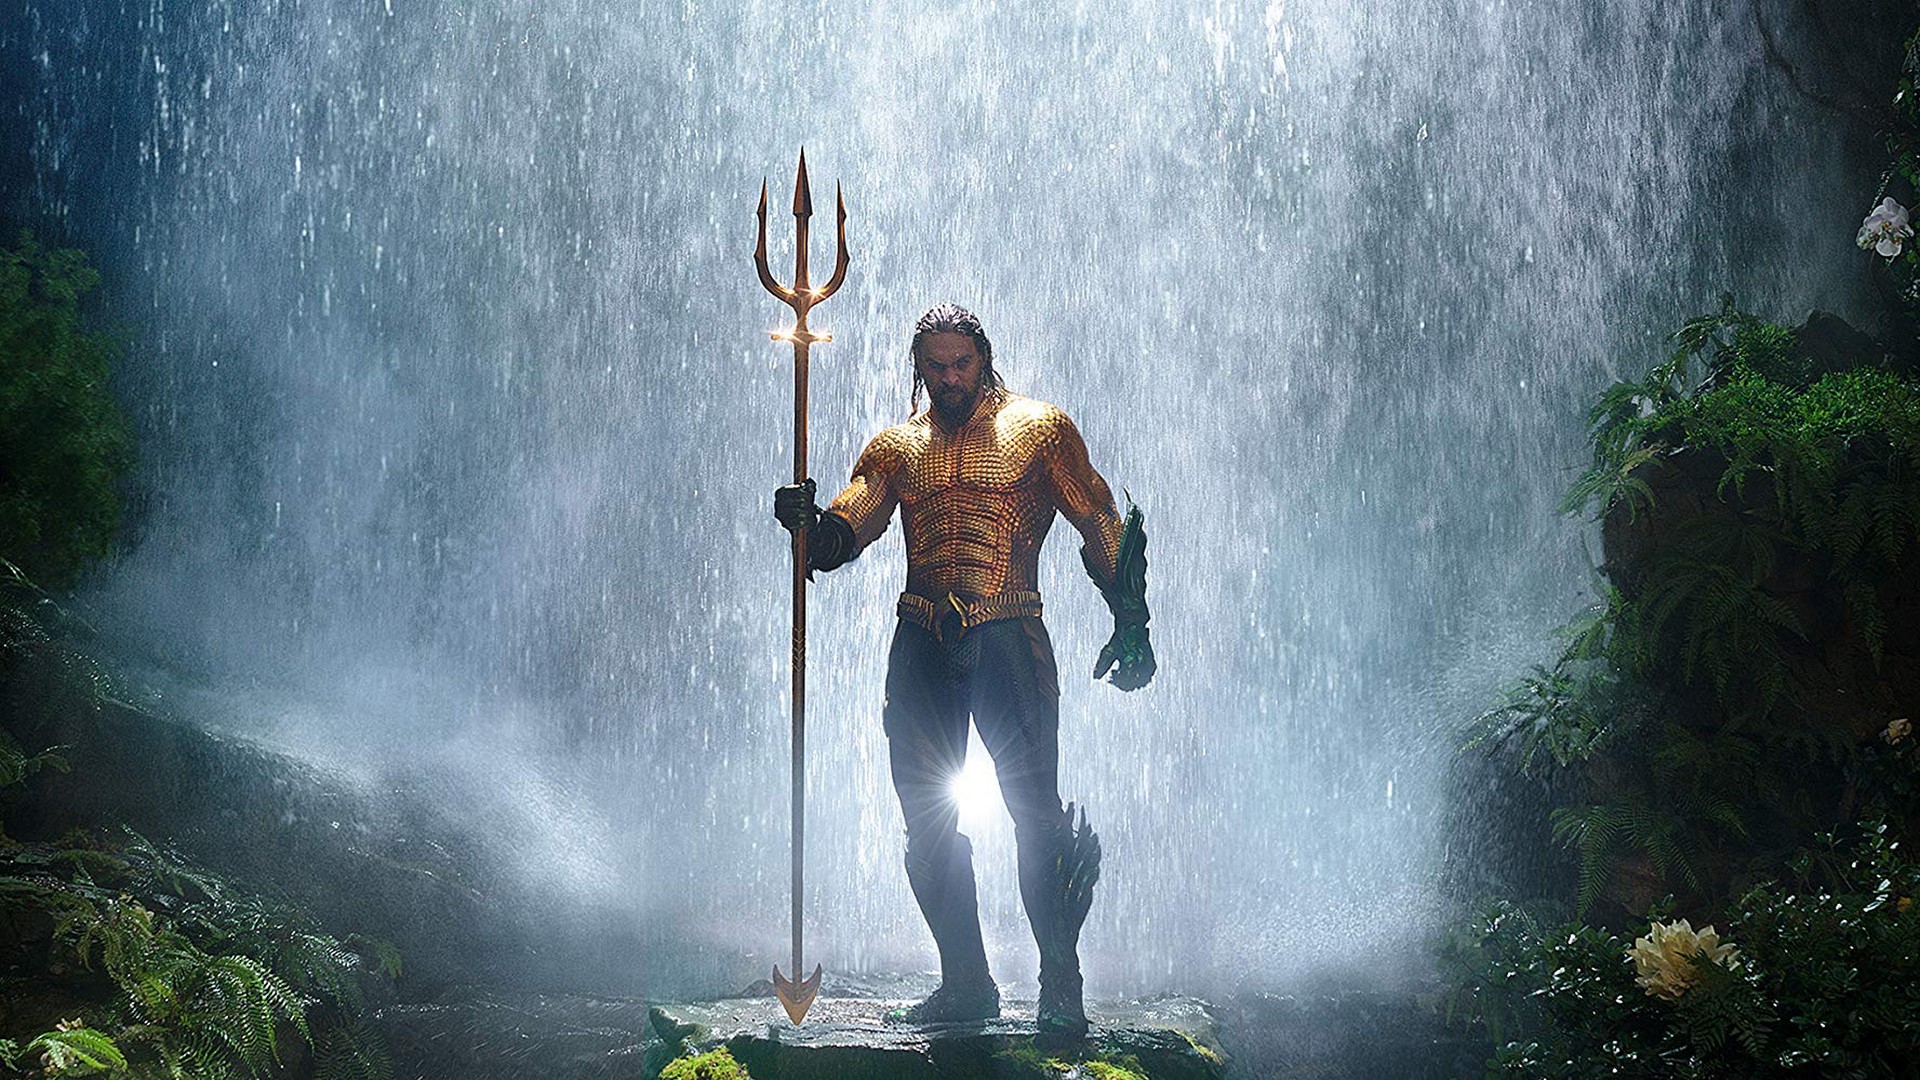 Aquaman HD Backgrounds With Resolution 1920X1080 pixel. You can make this wallpaper for your Desktop Computer Backgrounds, Mac Wallpapers, Android Lock screen or iPhone Screensavers